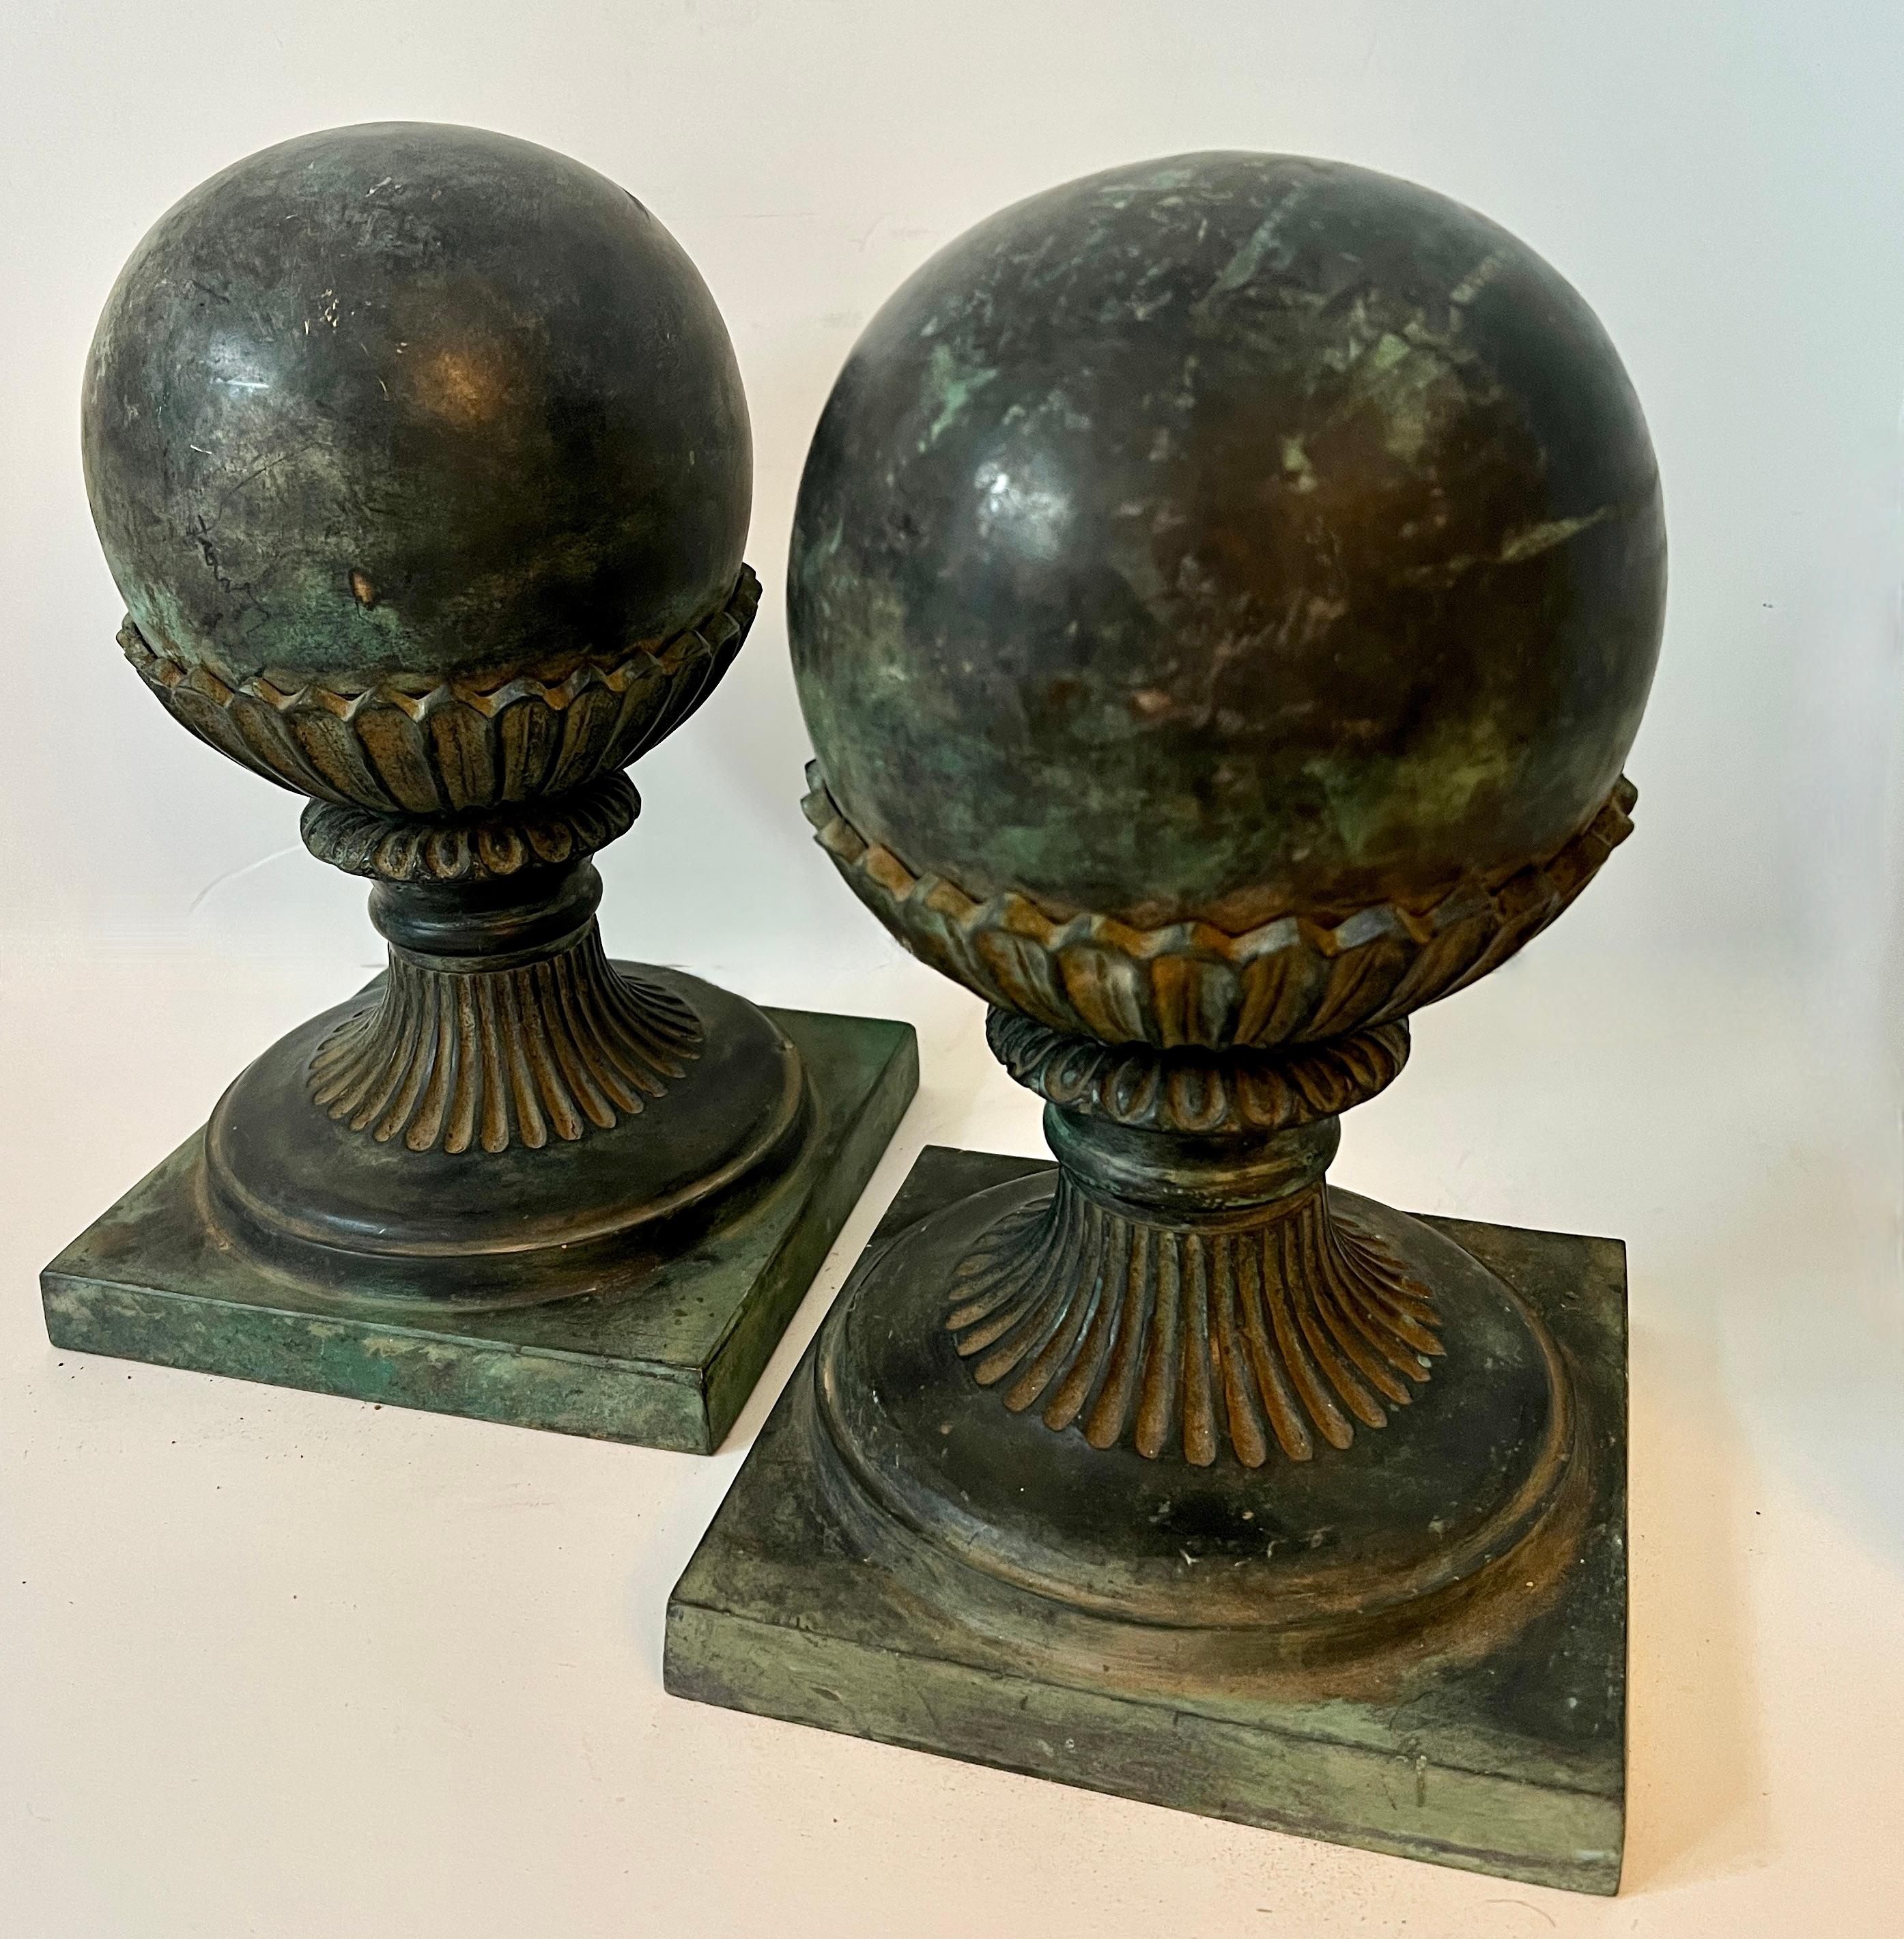 Pair of patinated spherical bronze finials on a fluted pedestal base.

The pair work well on a console or hall table as decor, or flanking a fireplace or large table, and also great garden decor.  At 11 inches tall and 8.5 pounds each make terrific